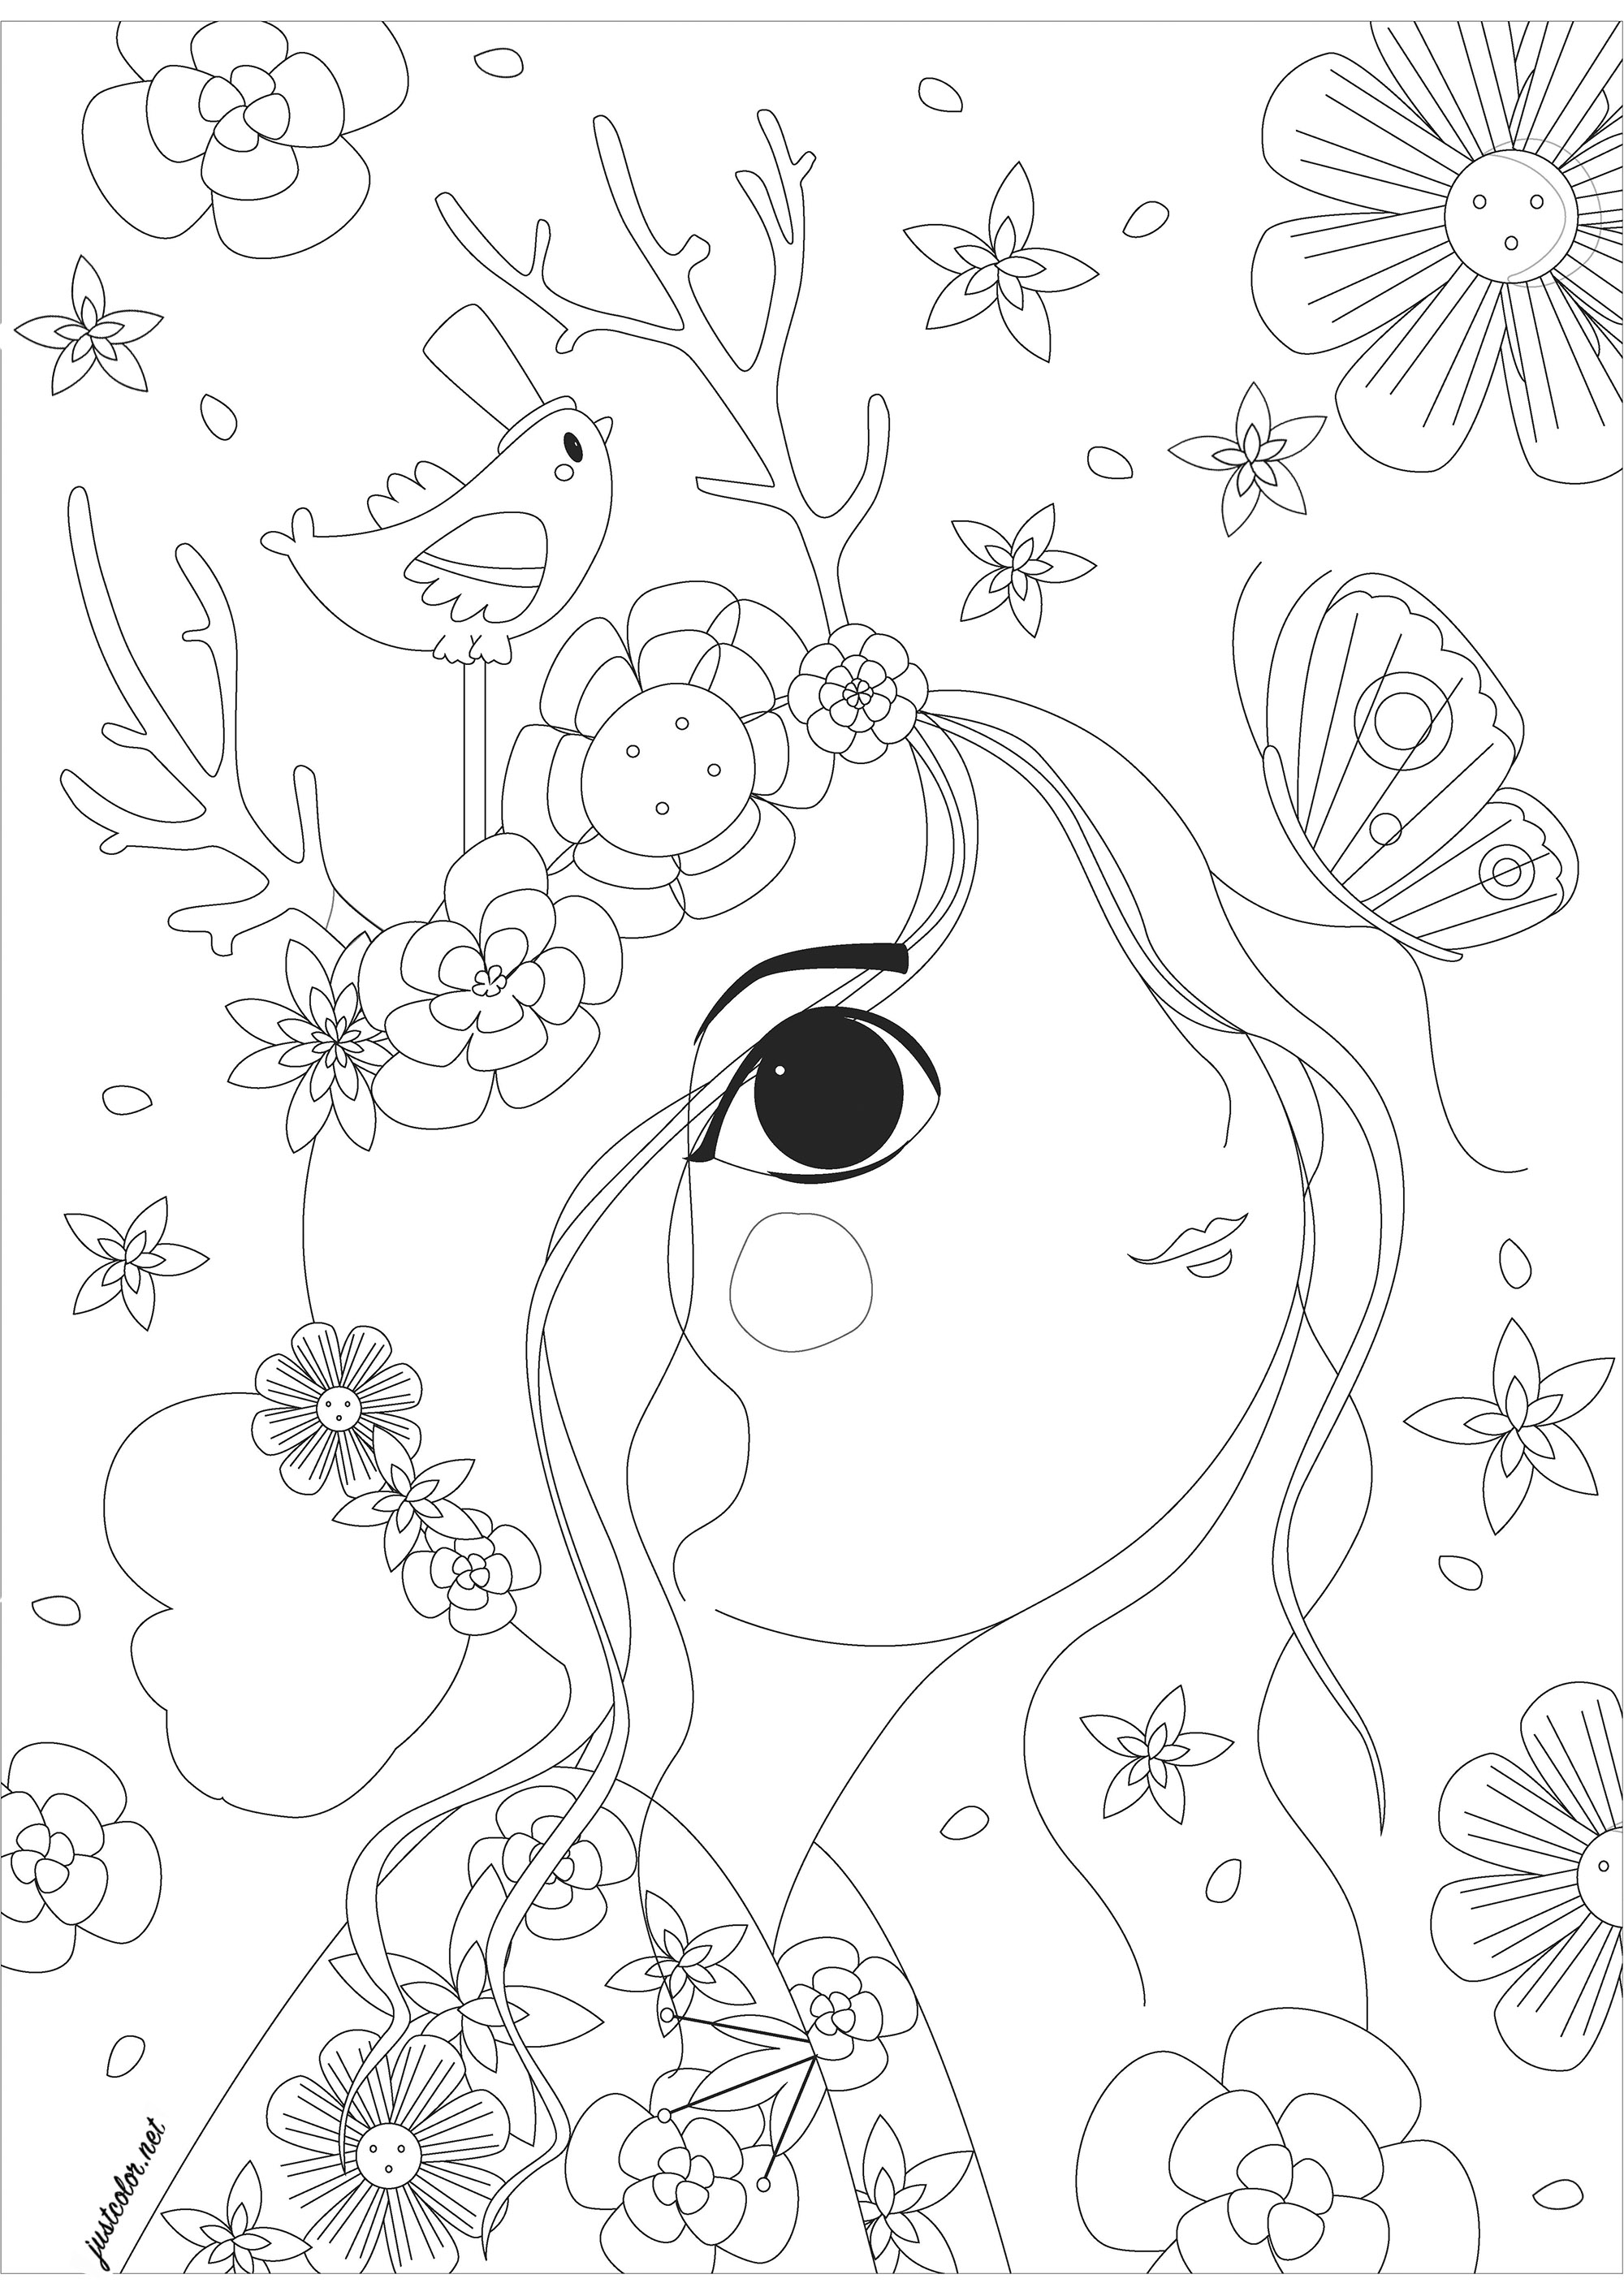 Woman seen in profile looking at a butterfly, surrounded by flowers. A very soothing coloring, just waiting for beautiful colors for all these flowers, butterfly, pretty little bird and female character drawn with a unique style.